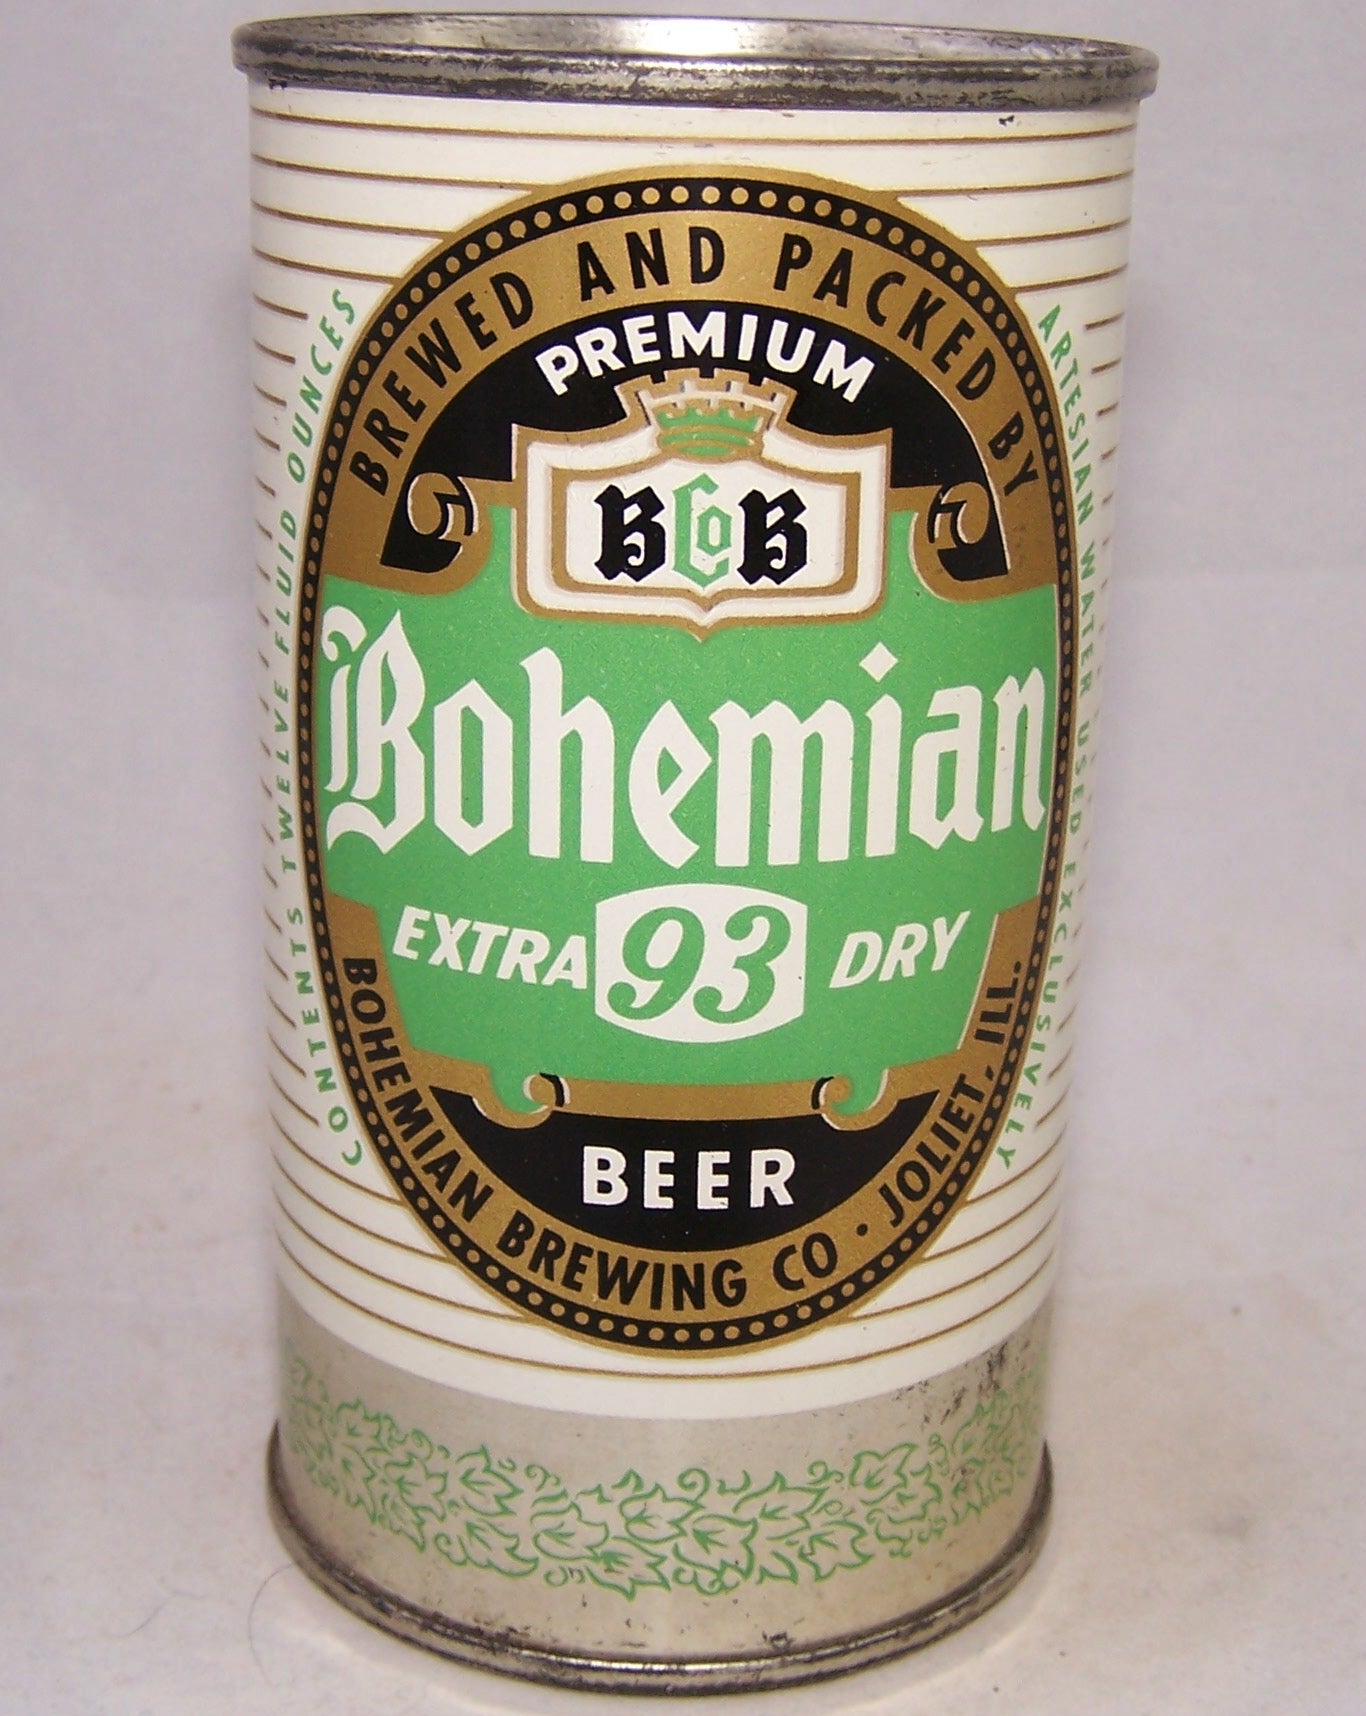 Bohemian 93 Extra Dry Beer, USBC 40-19, Grade A1+ Sold on 02/16/18